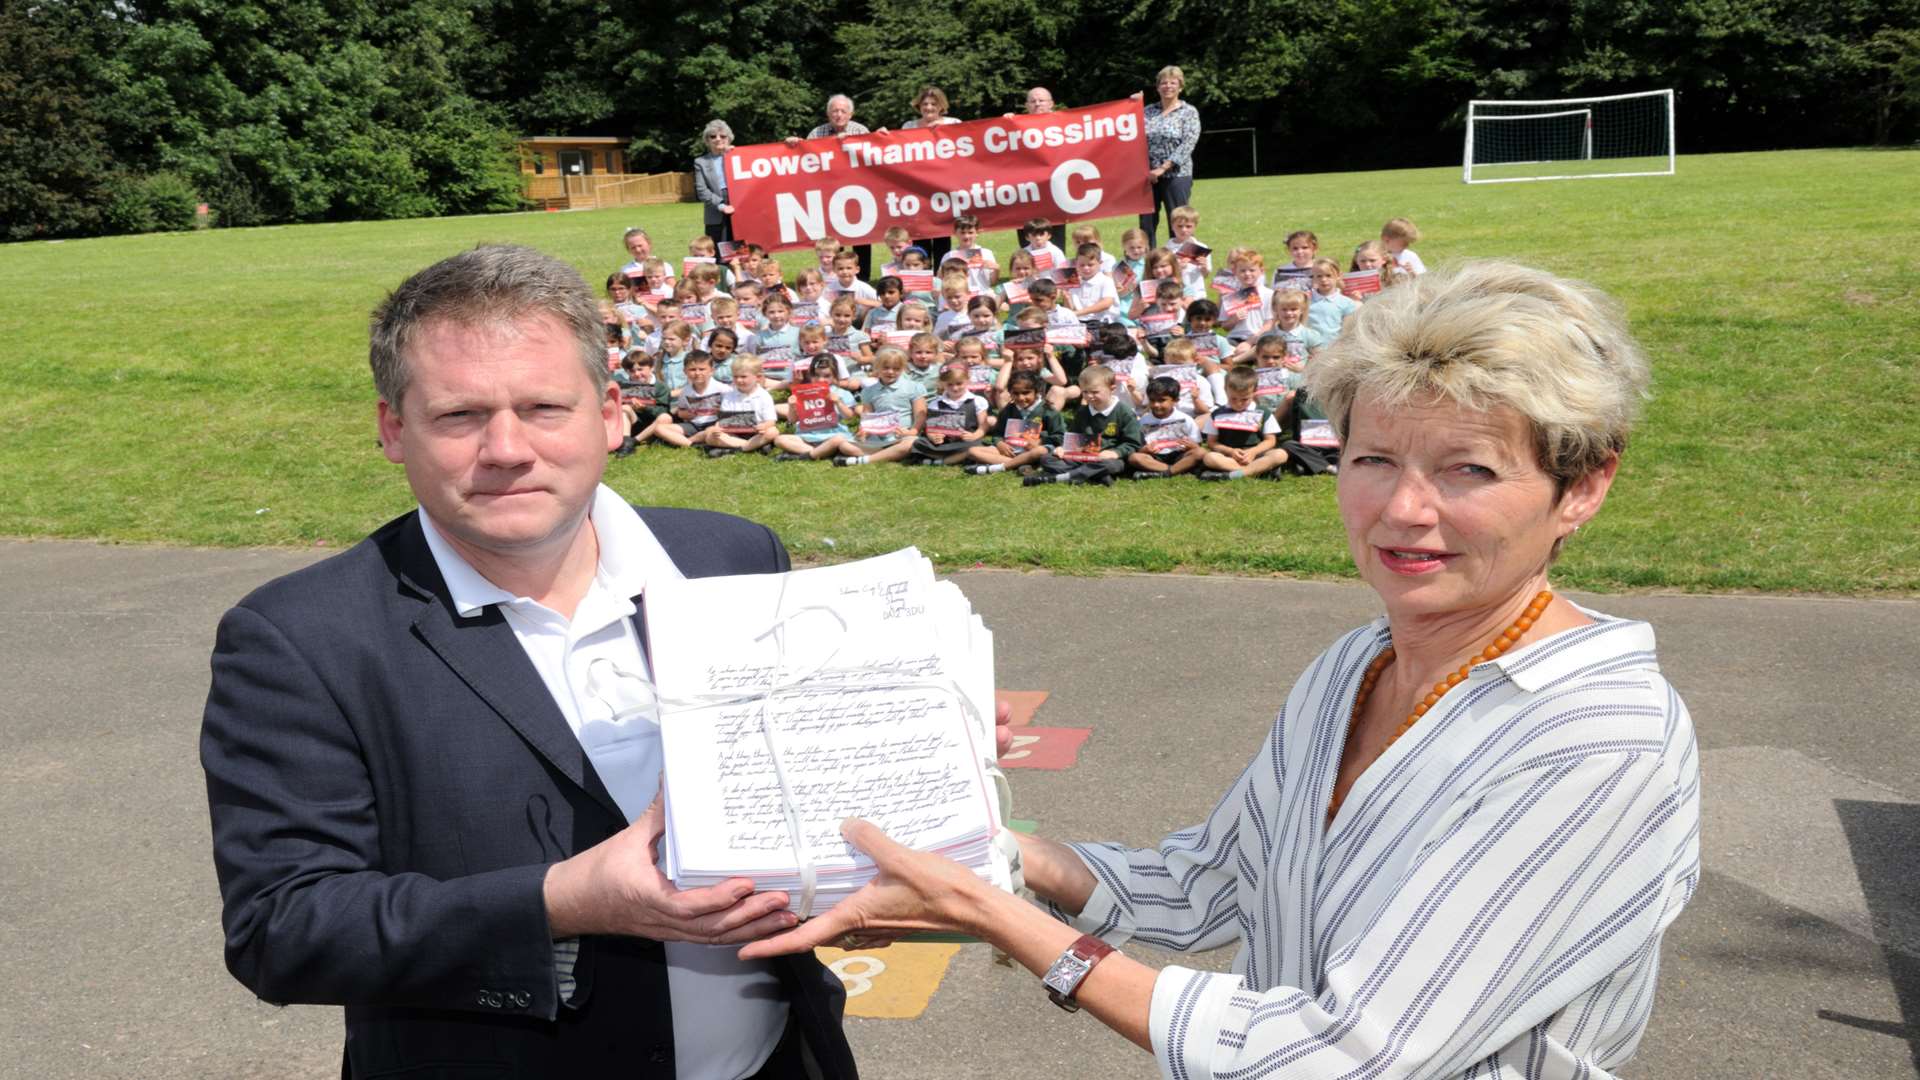 MP Adam Holloway accepts the petition from Clare Waller, school governor and Shorne Action Group member